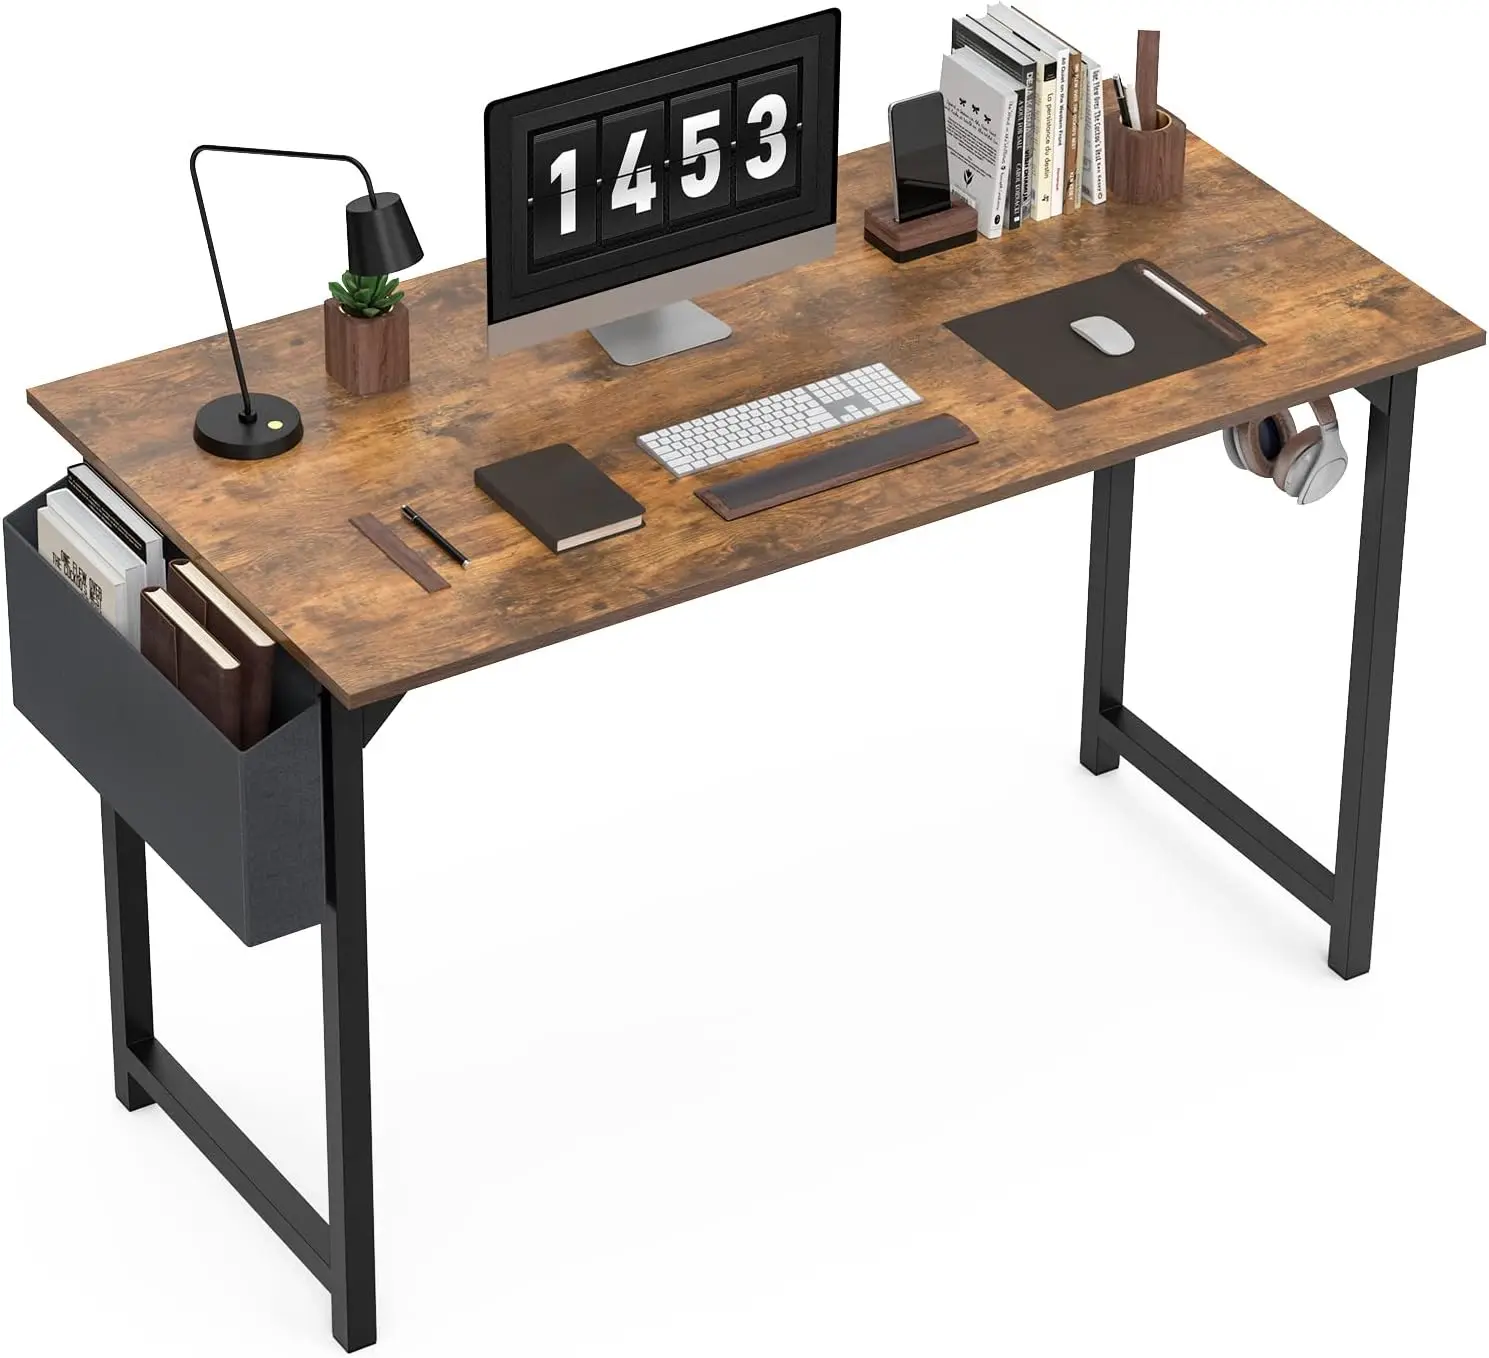 

Inch Home Office Desk - Computer Writing Desk for Small Spaces, Sturdy Simple Study Table with Storage Bag Headphone Hook, 47 x